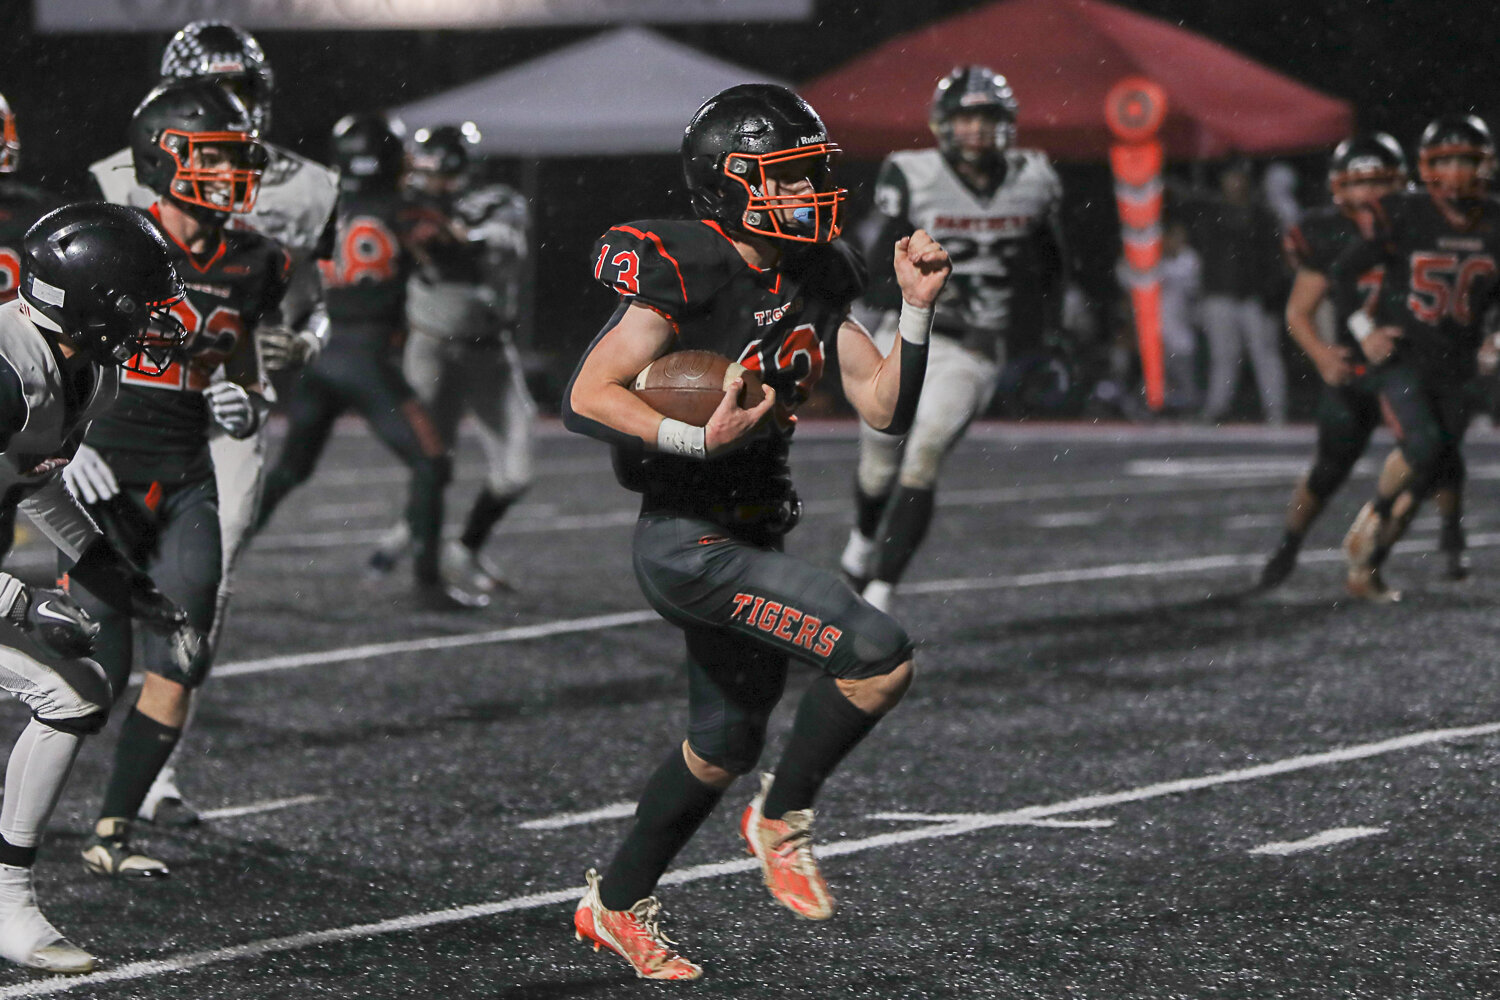 Conner Holmes rushes down field during a 43-14 Napavine win over River View on Nov. 18.